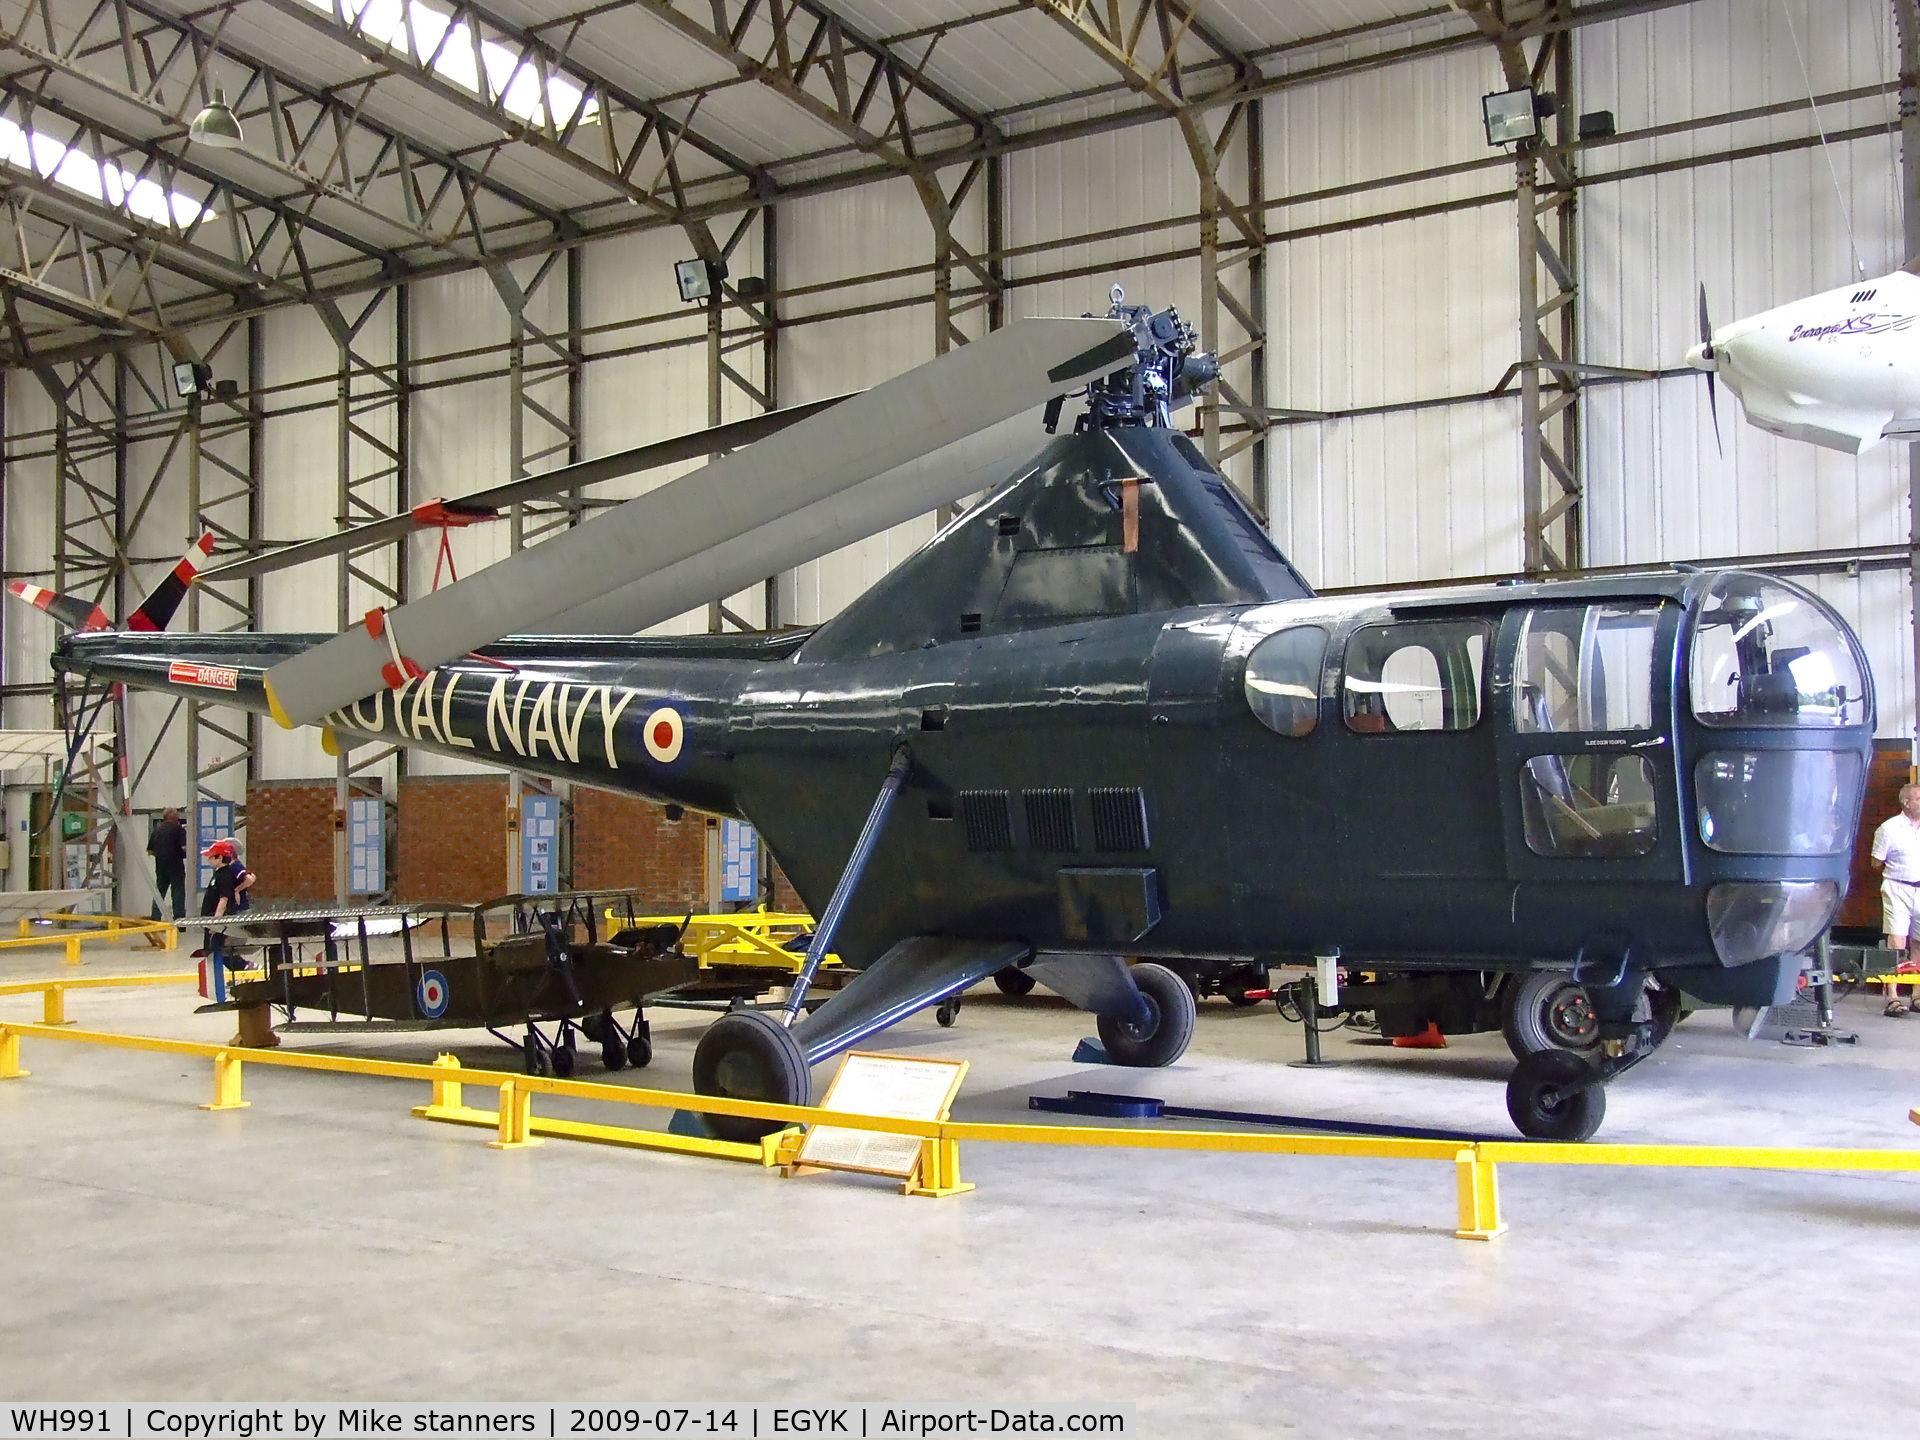 WH991, Westland Dragonfly HR.3 C/N WA/H/67, Dragonfly HR.5 On display at the Yorkshire air museum,Elvington